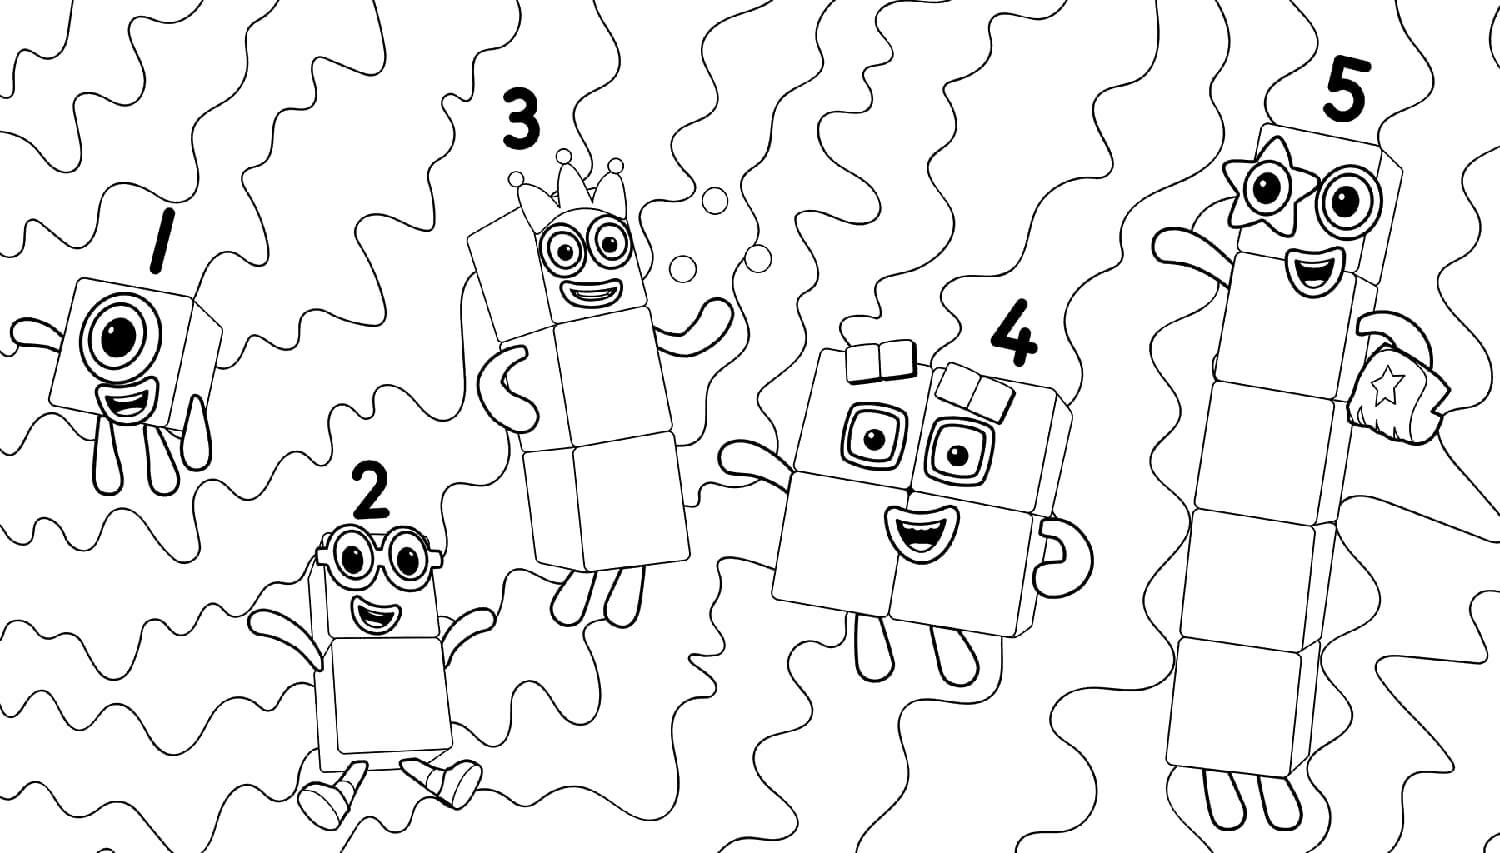 Numberblocks from 1 to 5